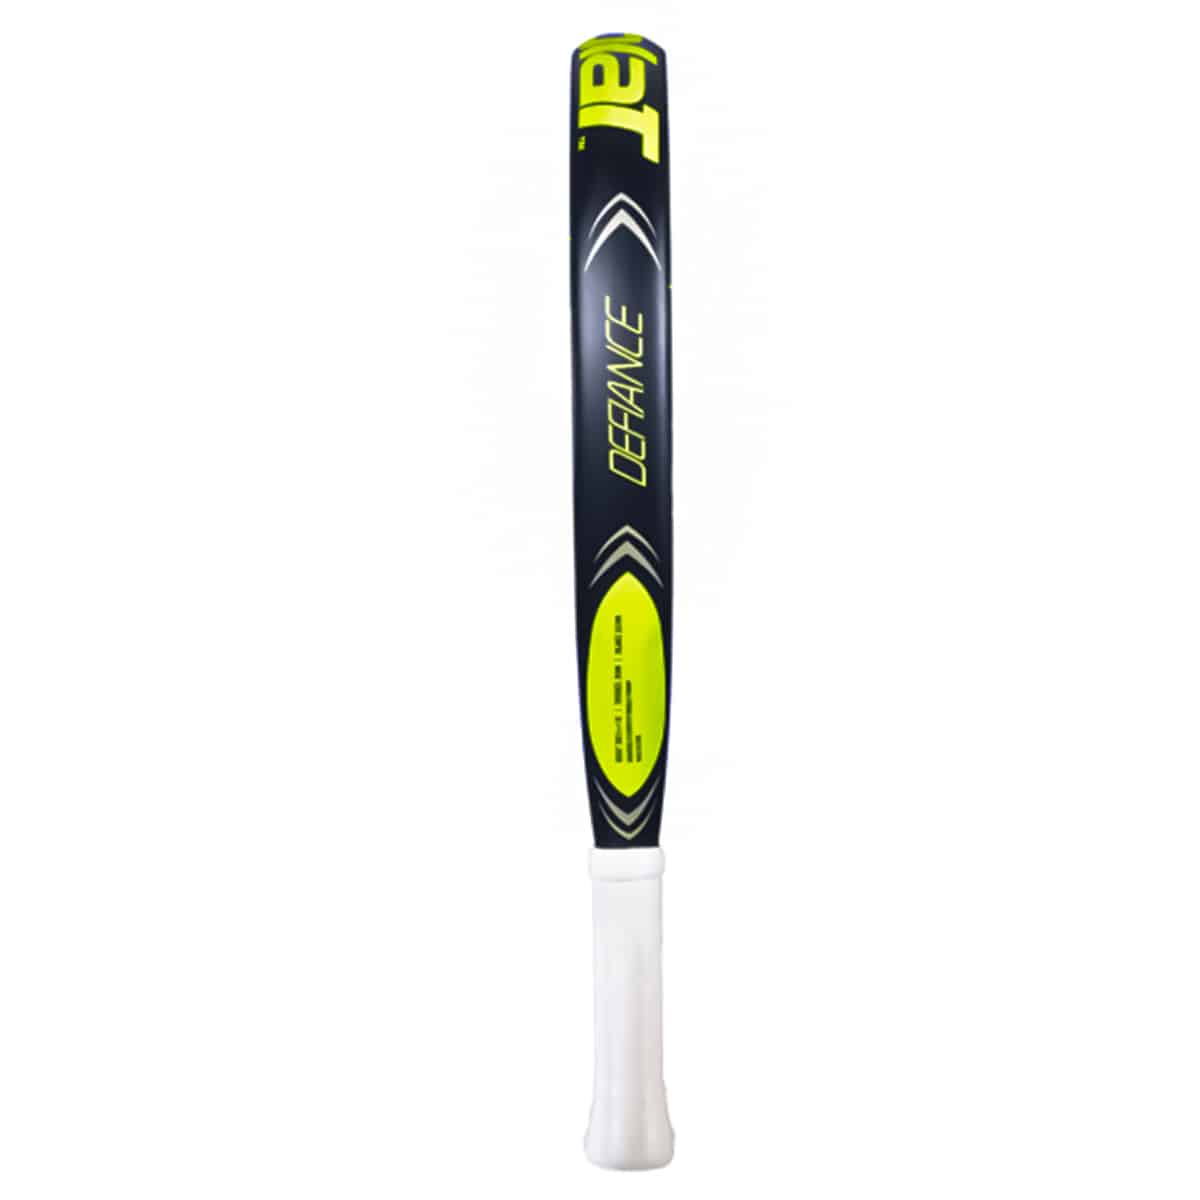 What level of player is the Babolat Defiance good for